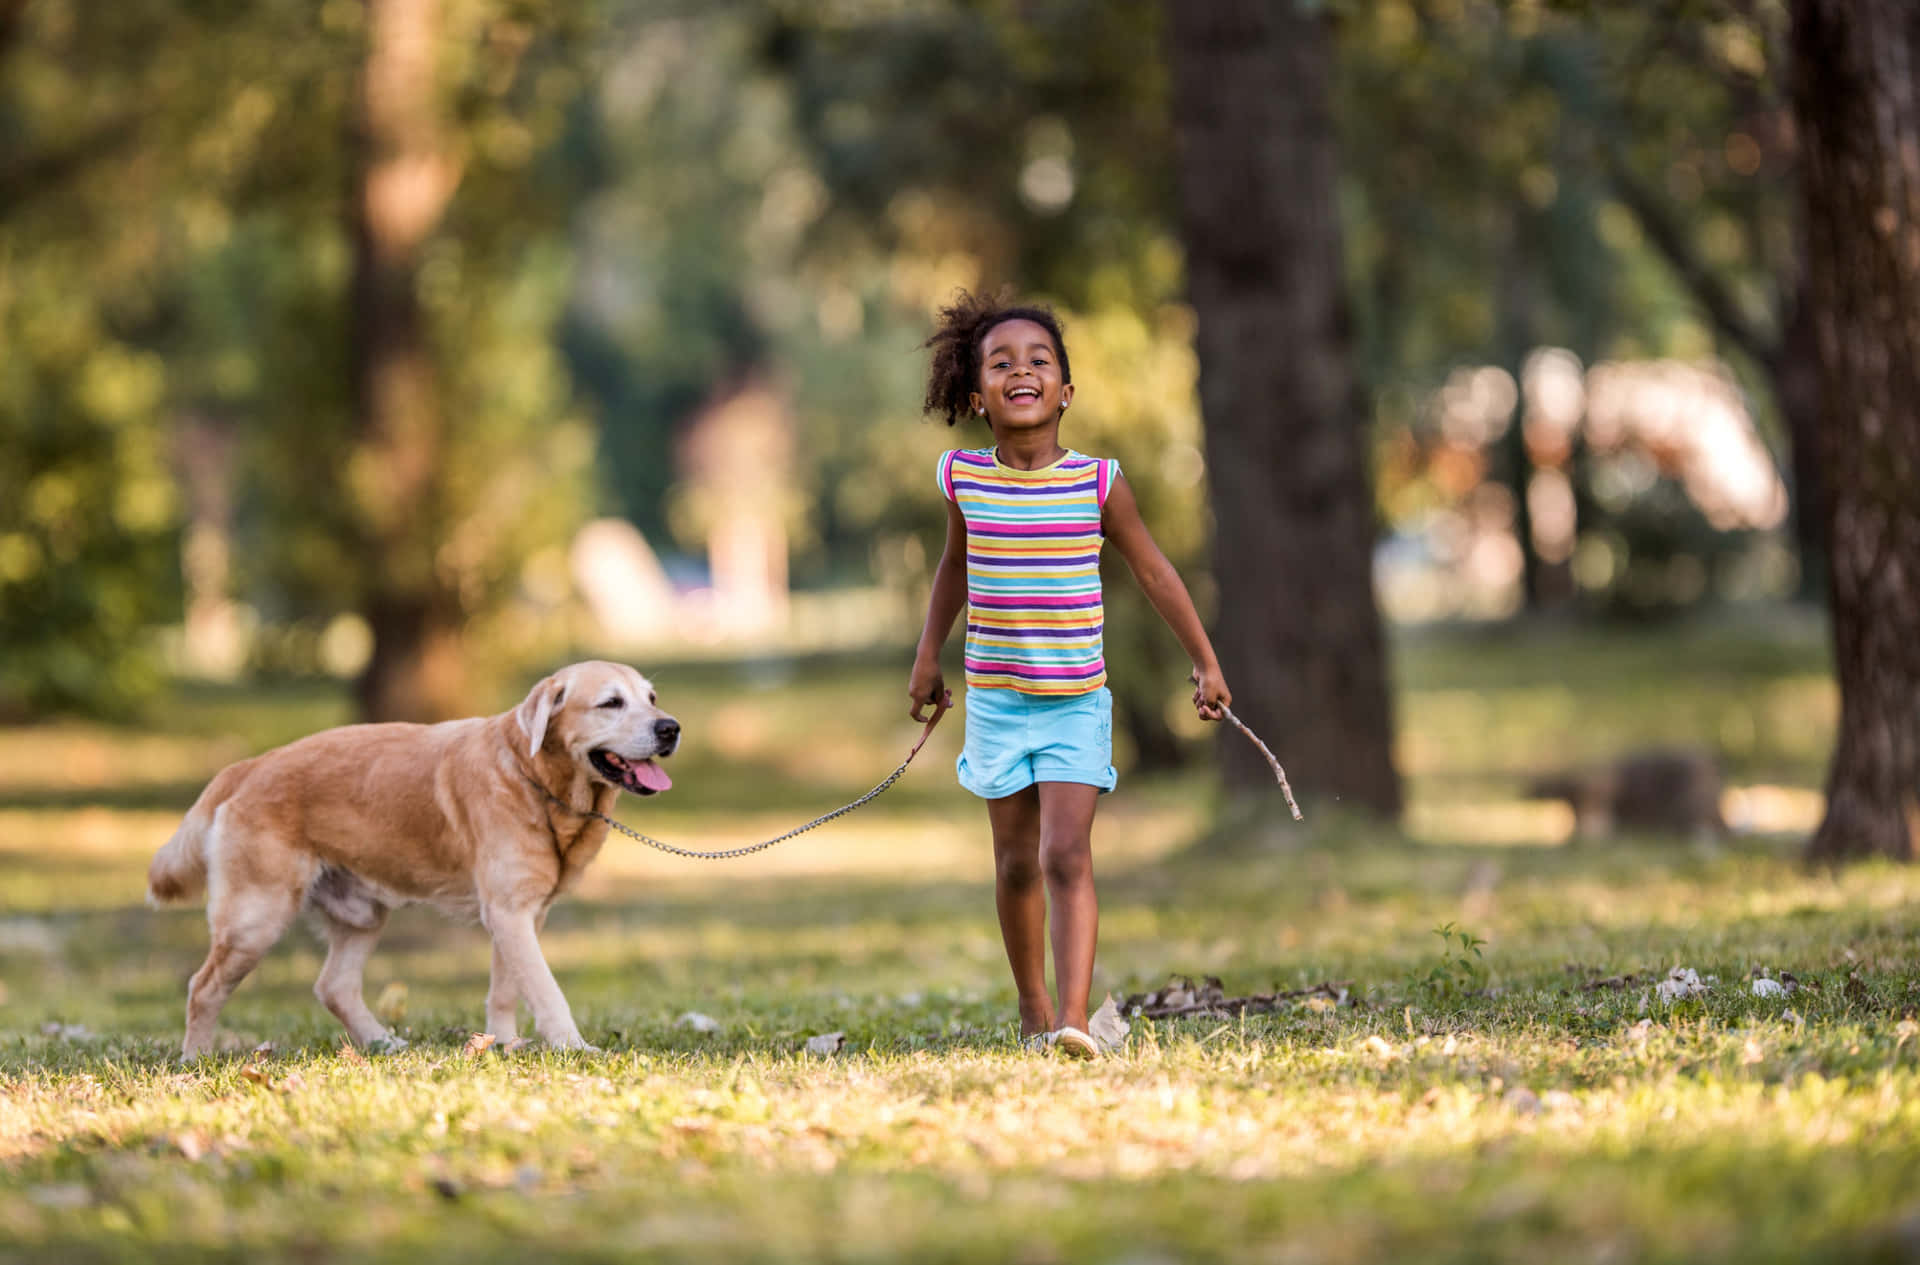 Golden Retriever Dog Walking With Girl Picture